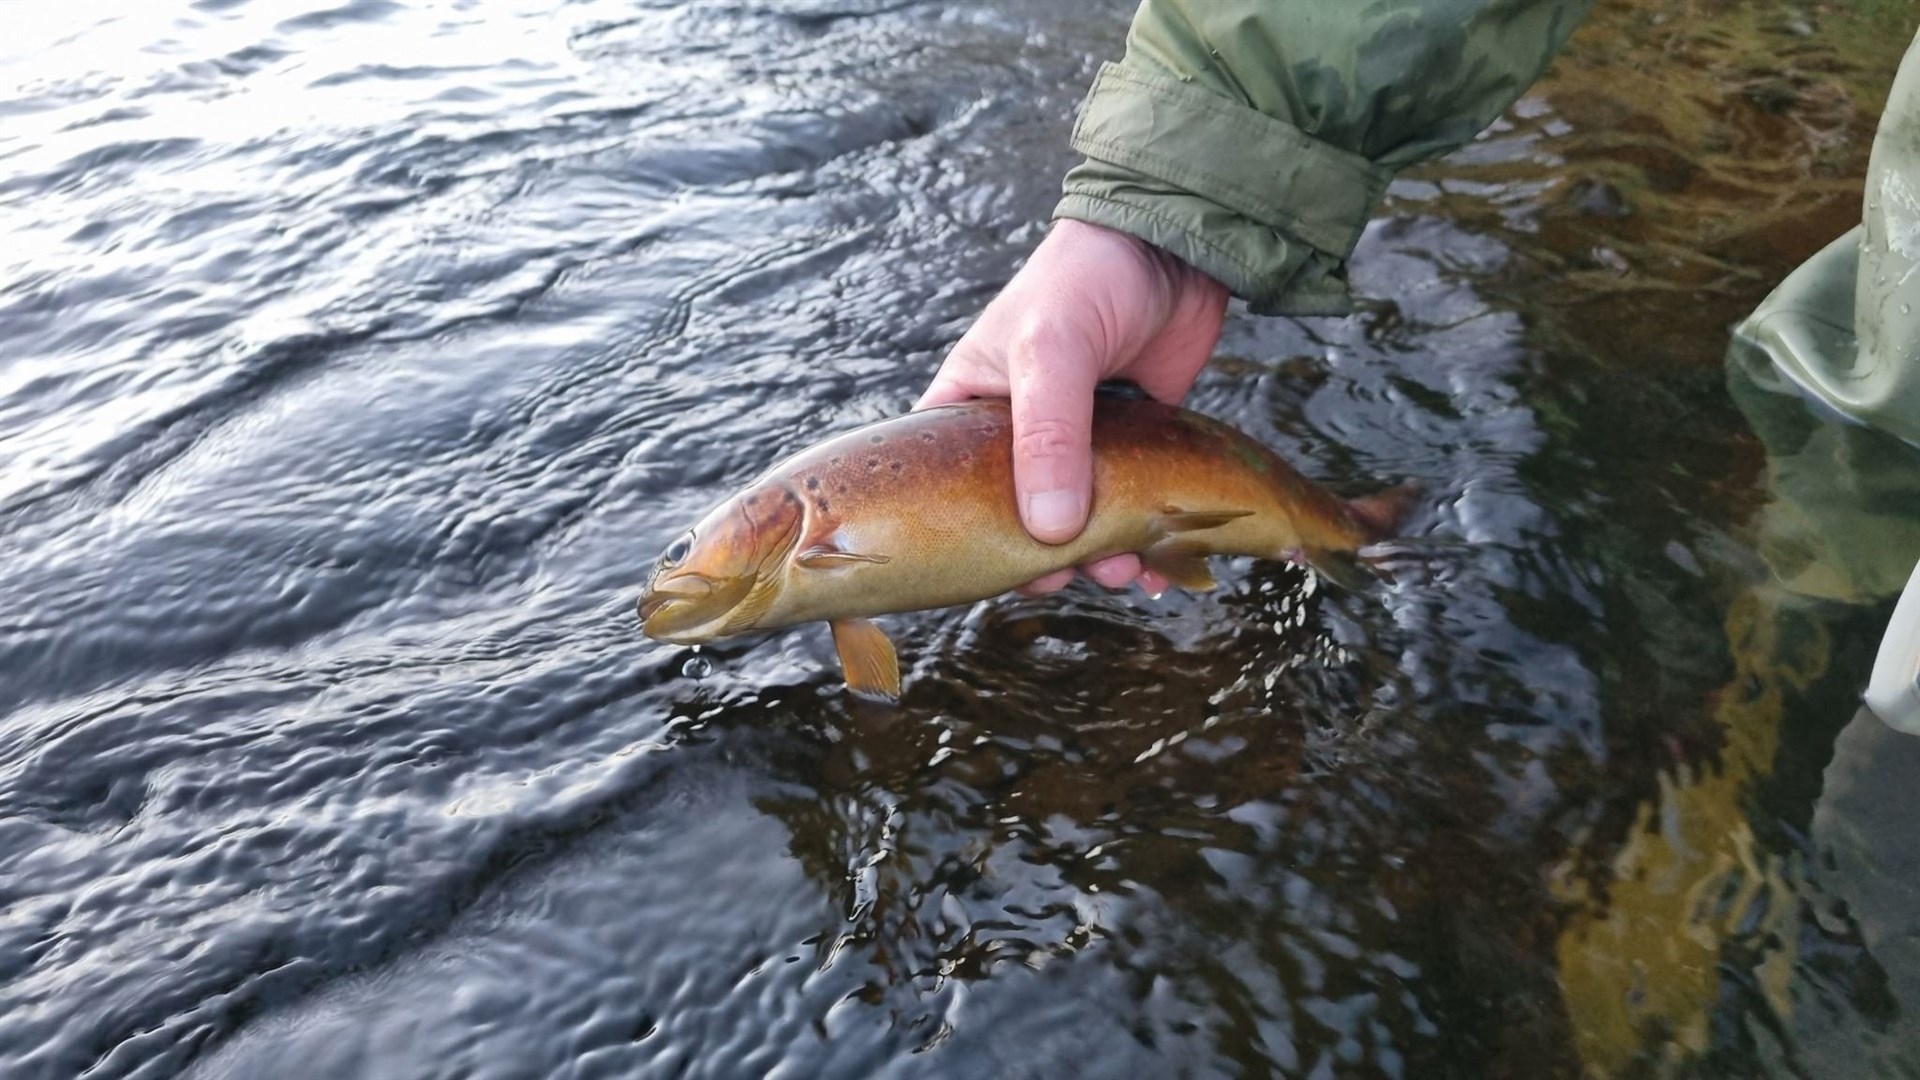 Released into the river.